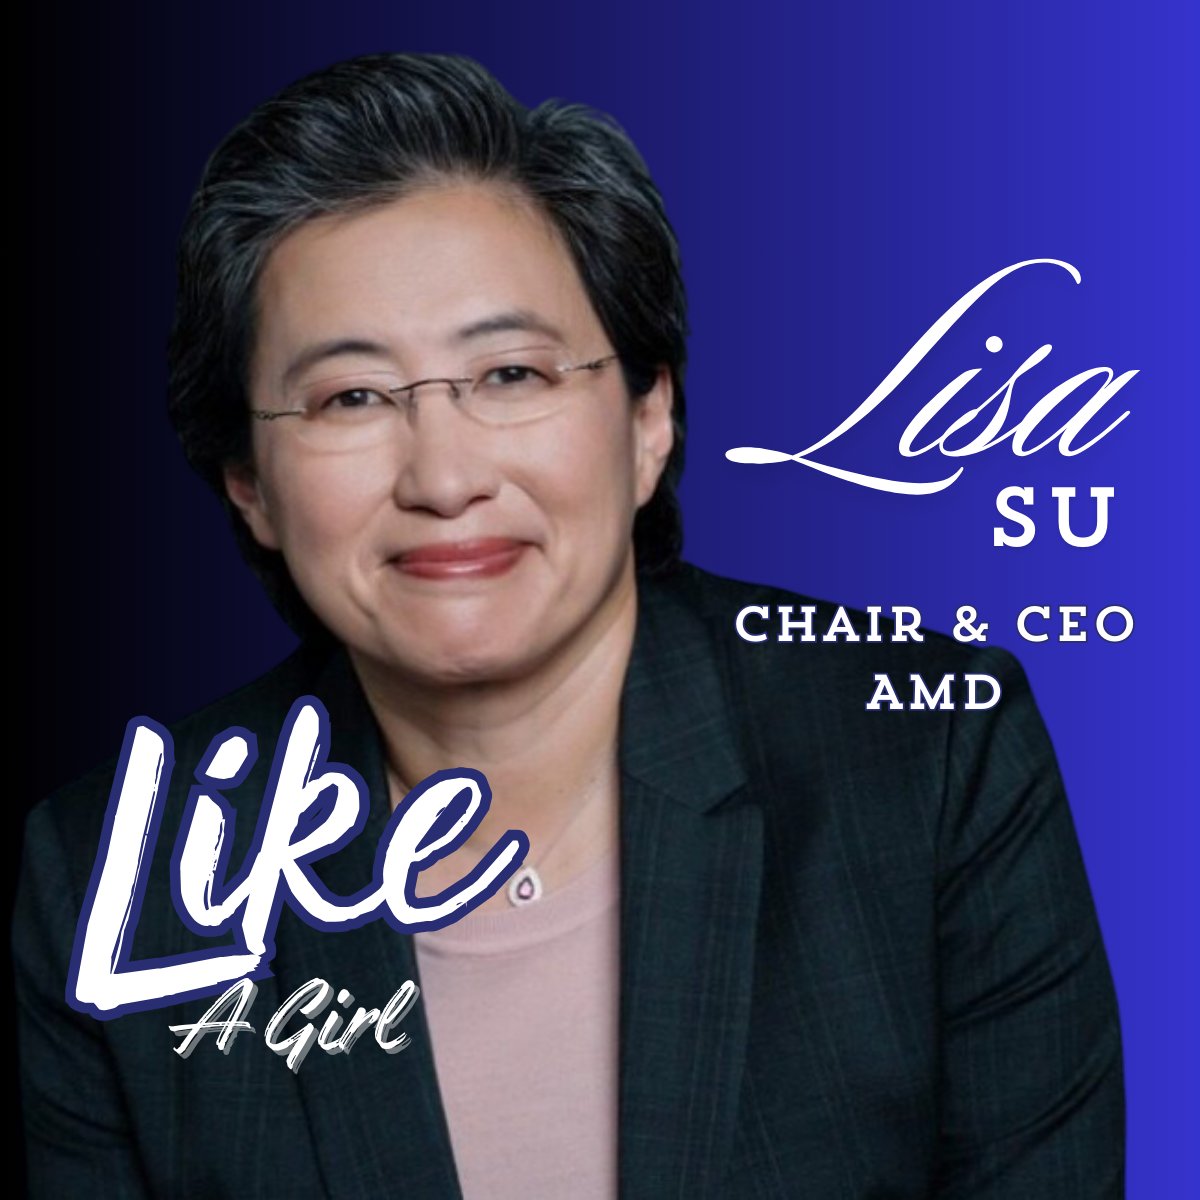 Help us in extending a very hearty 'Congratulations' to Dr. @LisaSu , Chair and CEO of @AMD. Dr. Su has received the 'CEO of the Year' Award from the @CEO_CEG. 
#HITLikeagirl  #lisasu #ceooftheyear #congratulations